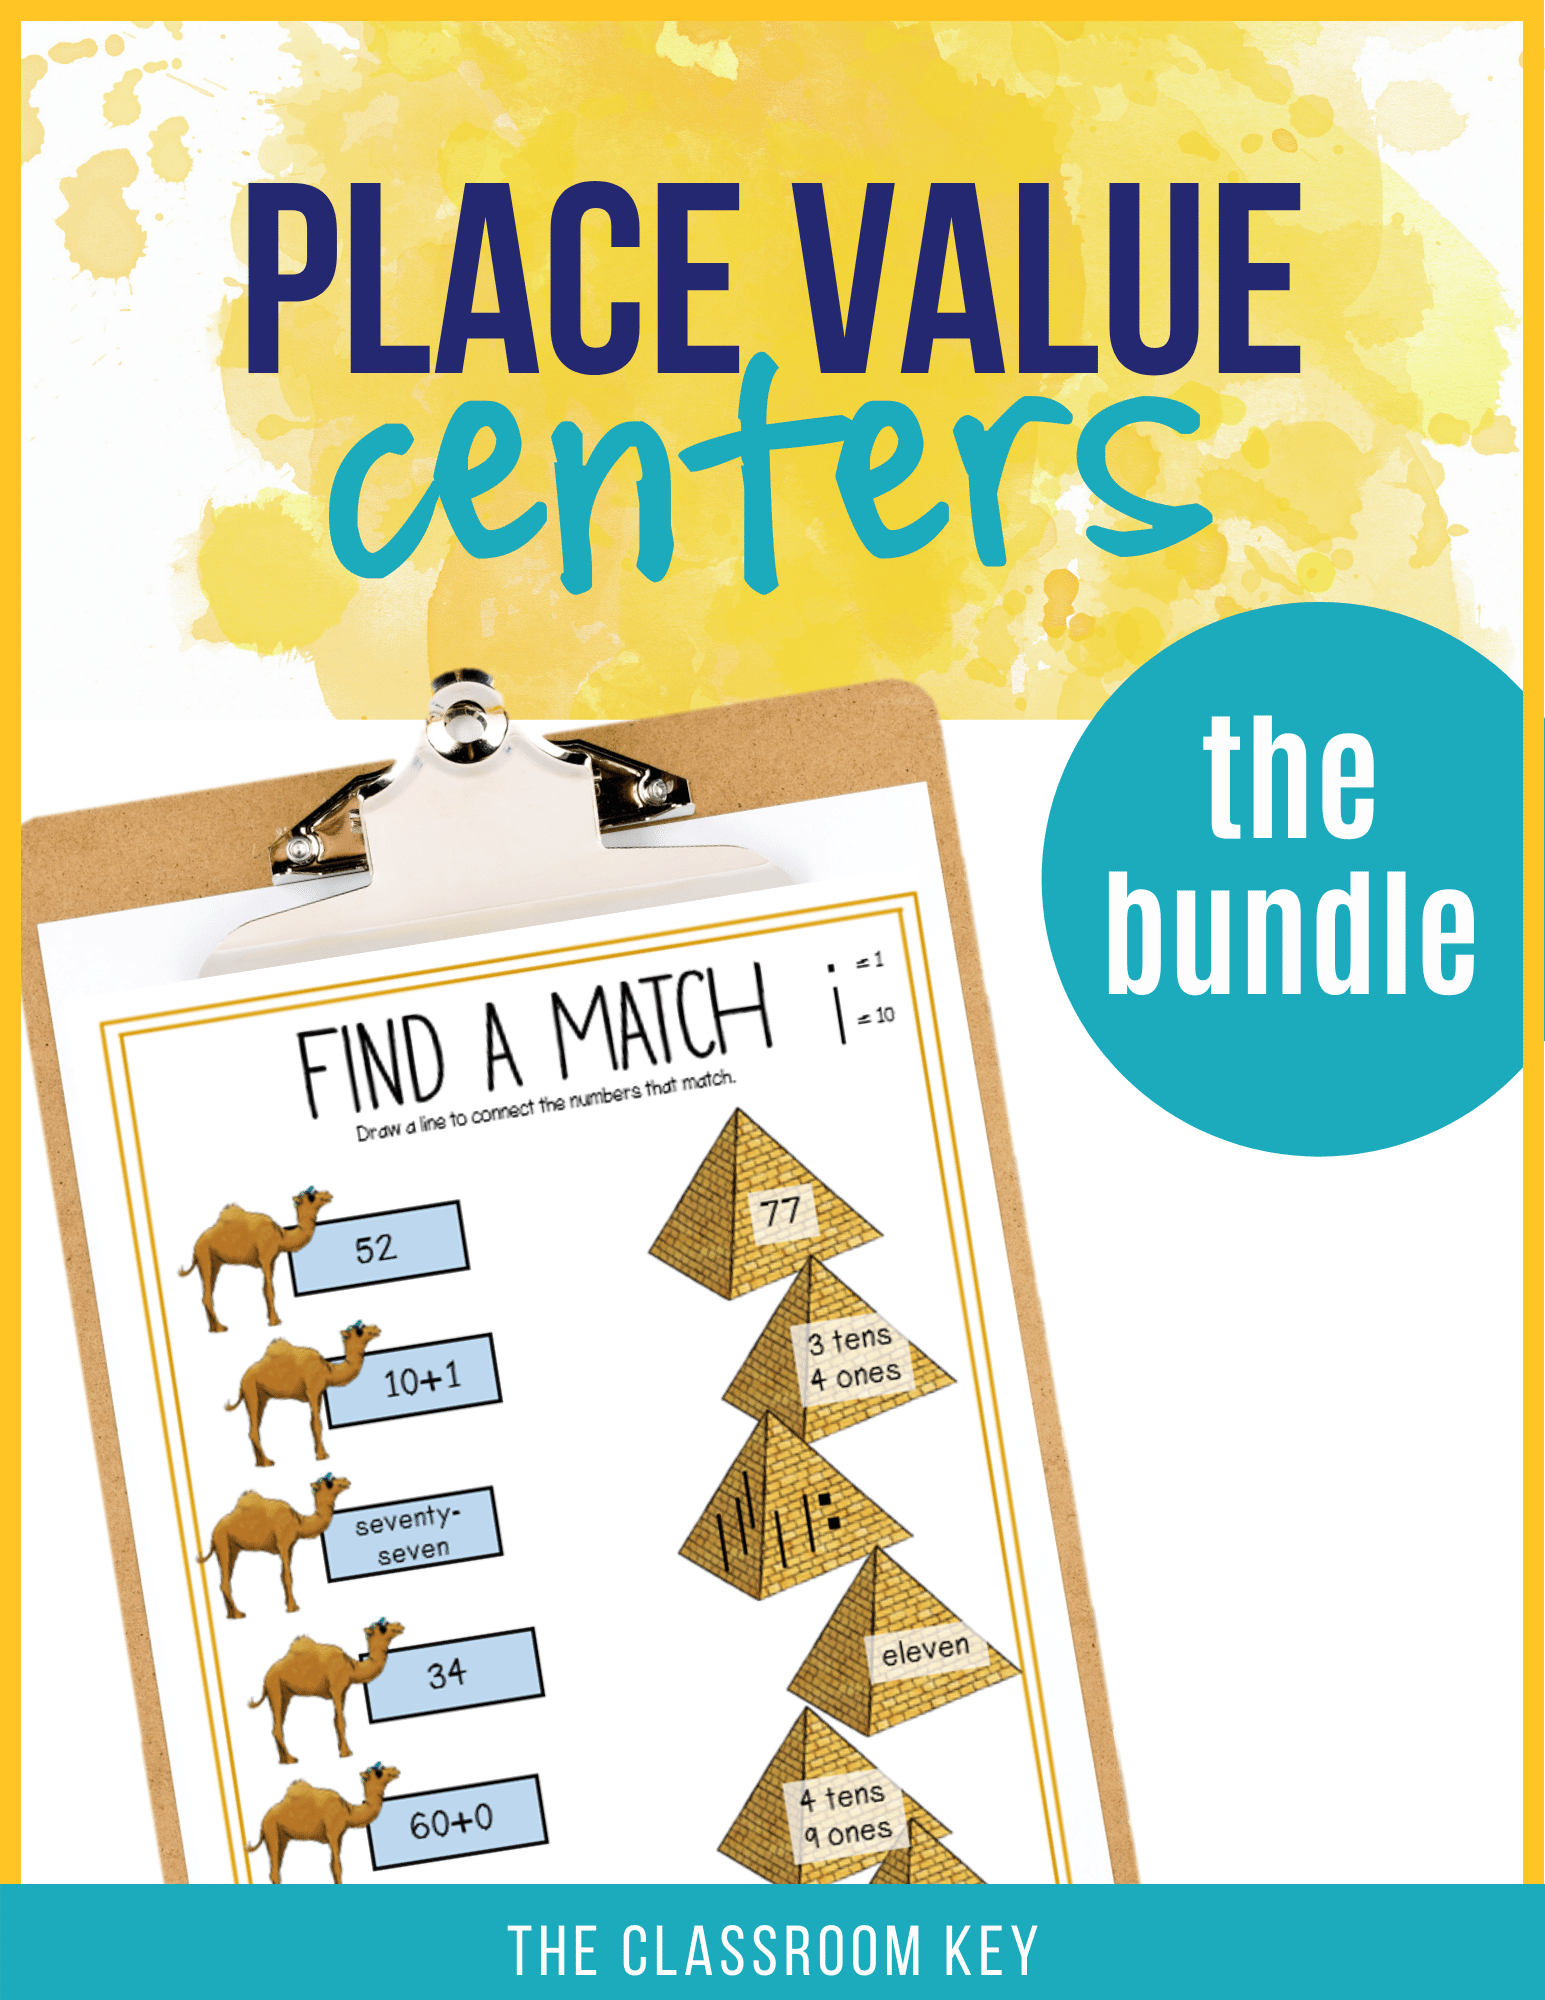 Help all of your students master place value concepts with this differentiated bundle of math center activities. Concepts covered include number words, teen numbers, ones, tens, and hundreds, base 10 block models, expanded form, and numerals. Aligned to Common Core standards for numbers in base ten. Perfect for 1st or 2nd graders